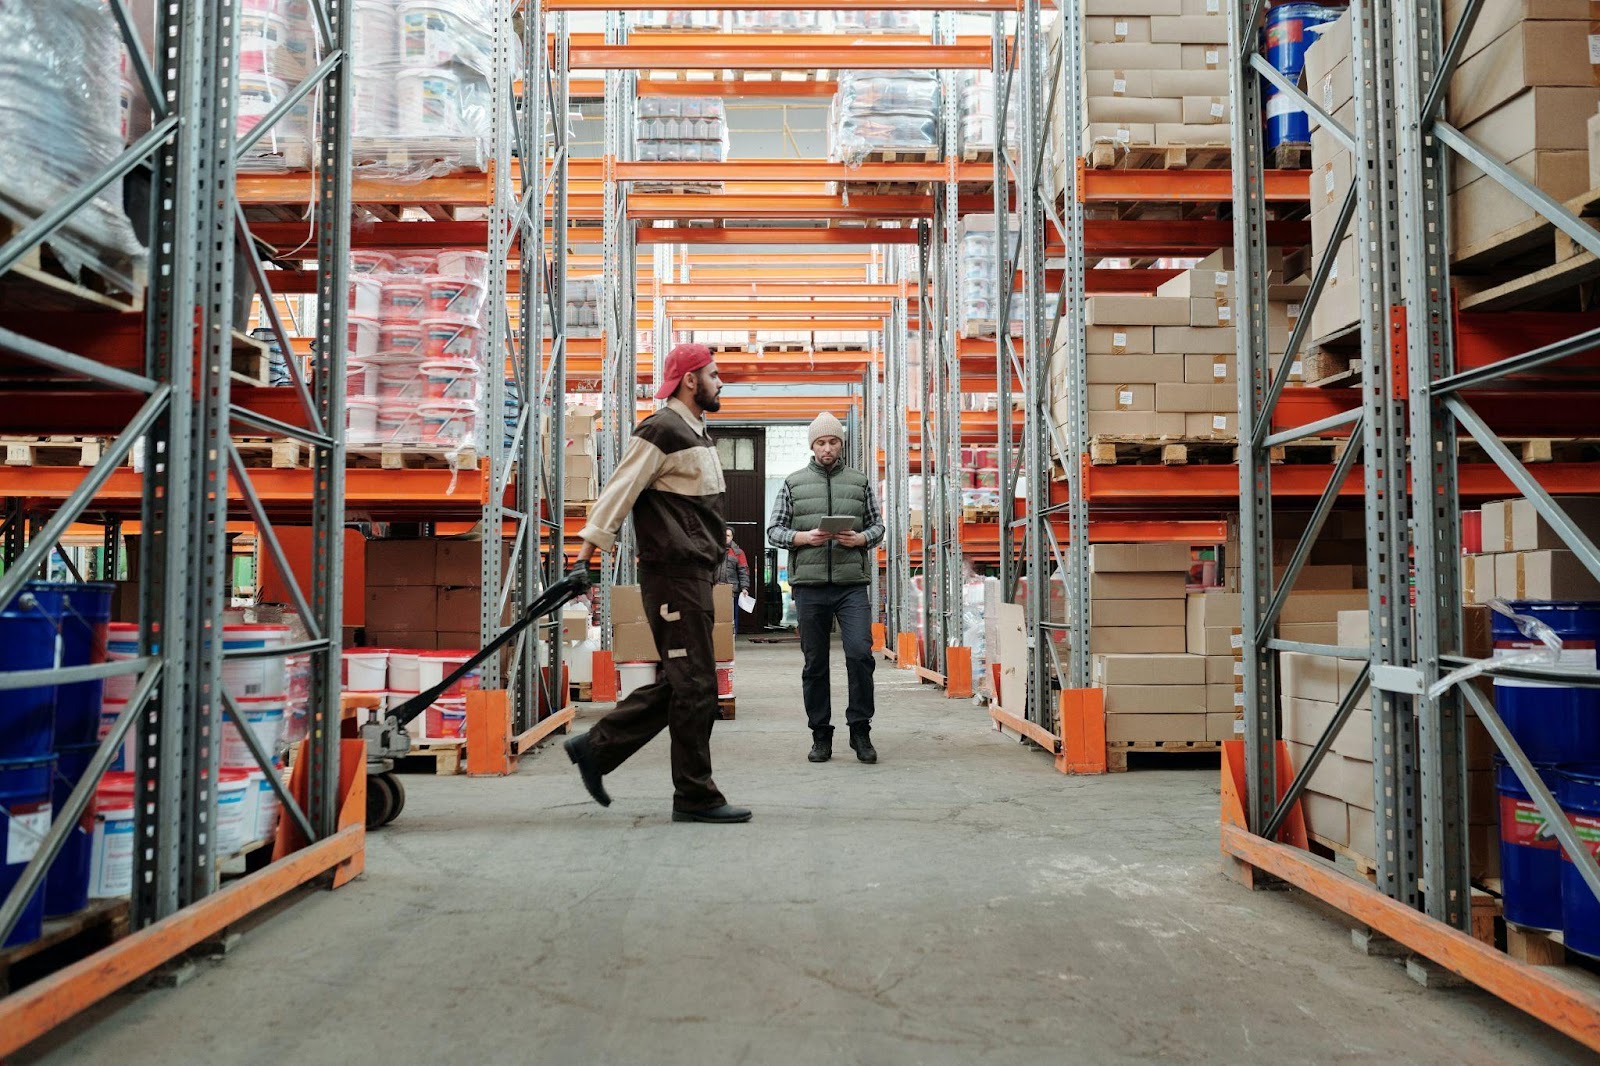  two men working in a warehouse